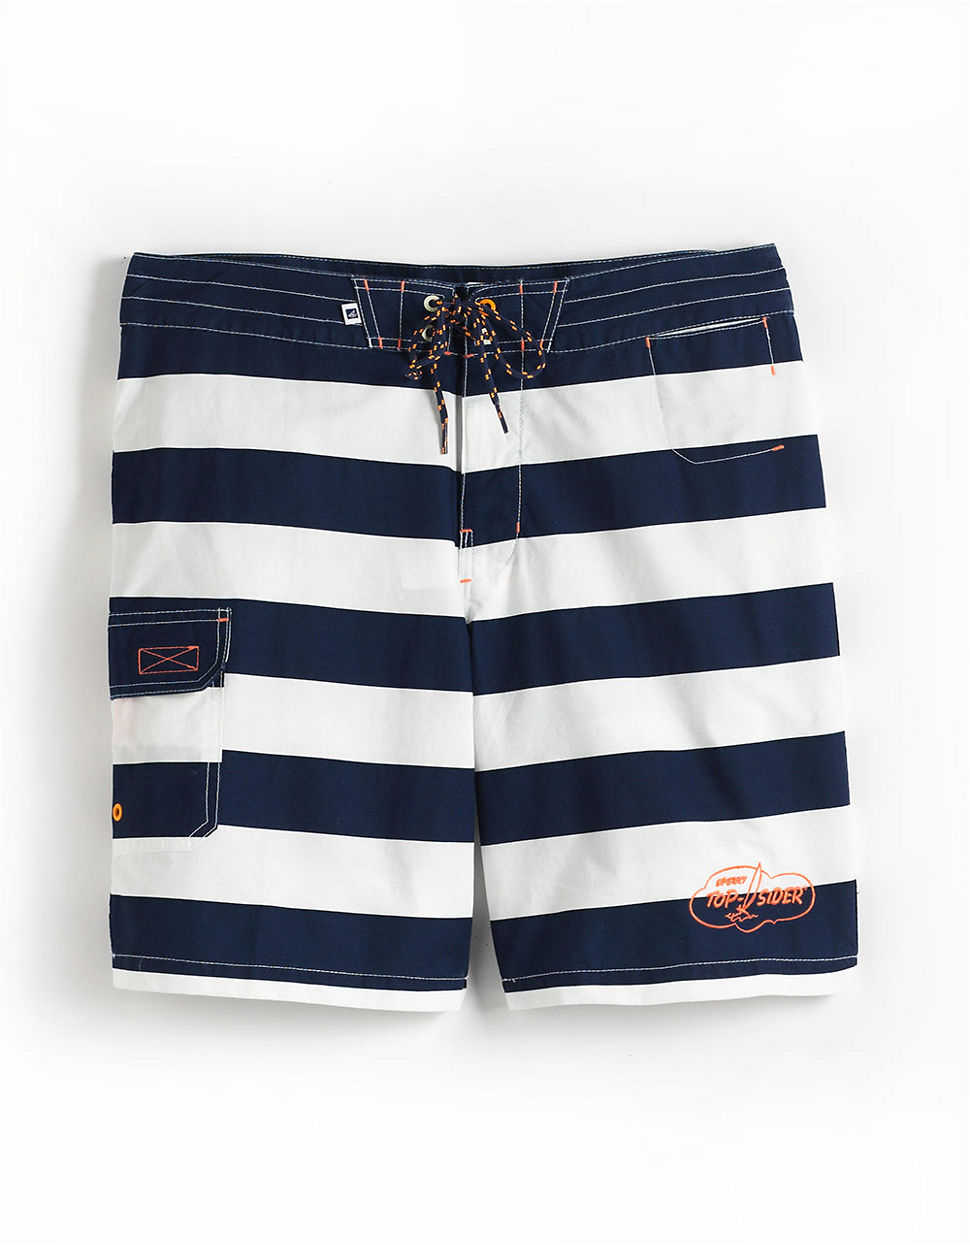 Lyst - Sperry Top-Sider Striped Board Shorts in White for Men